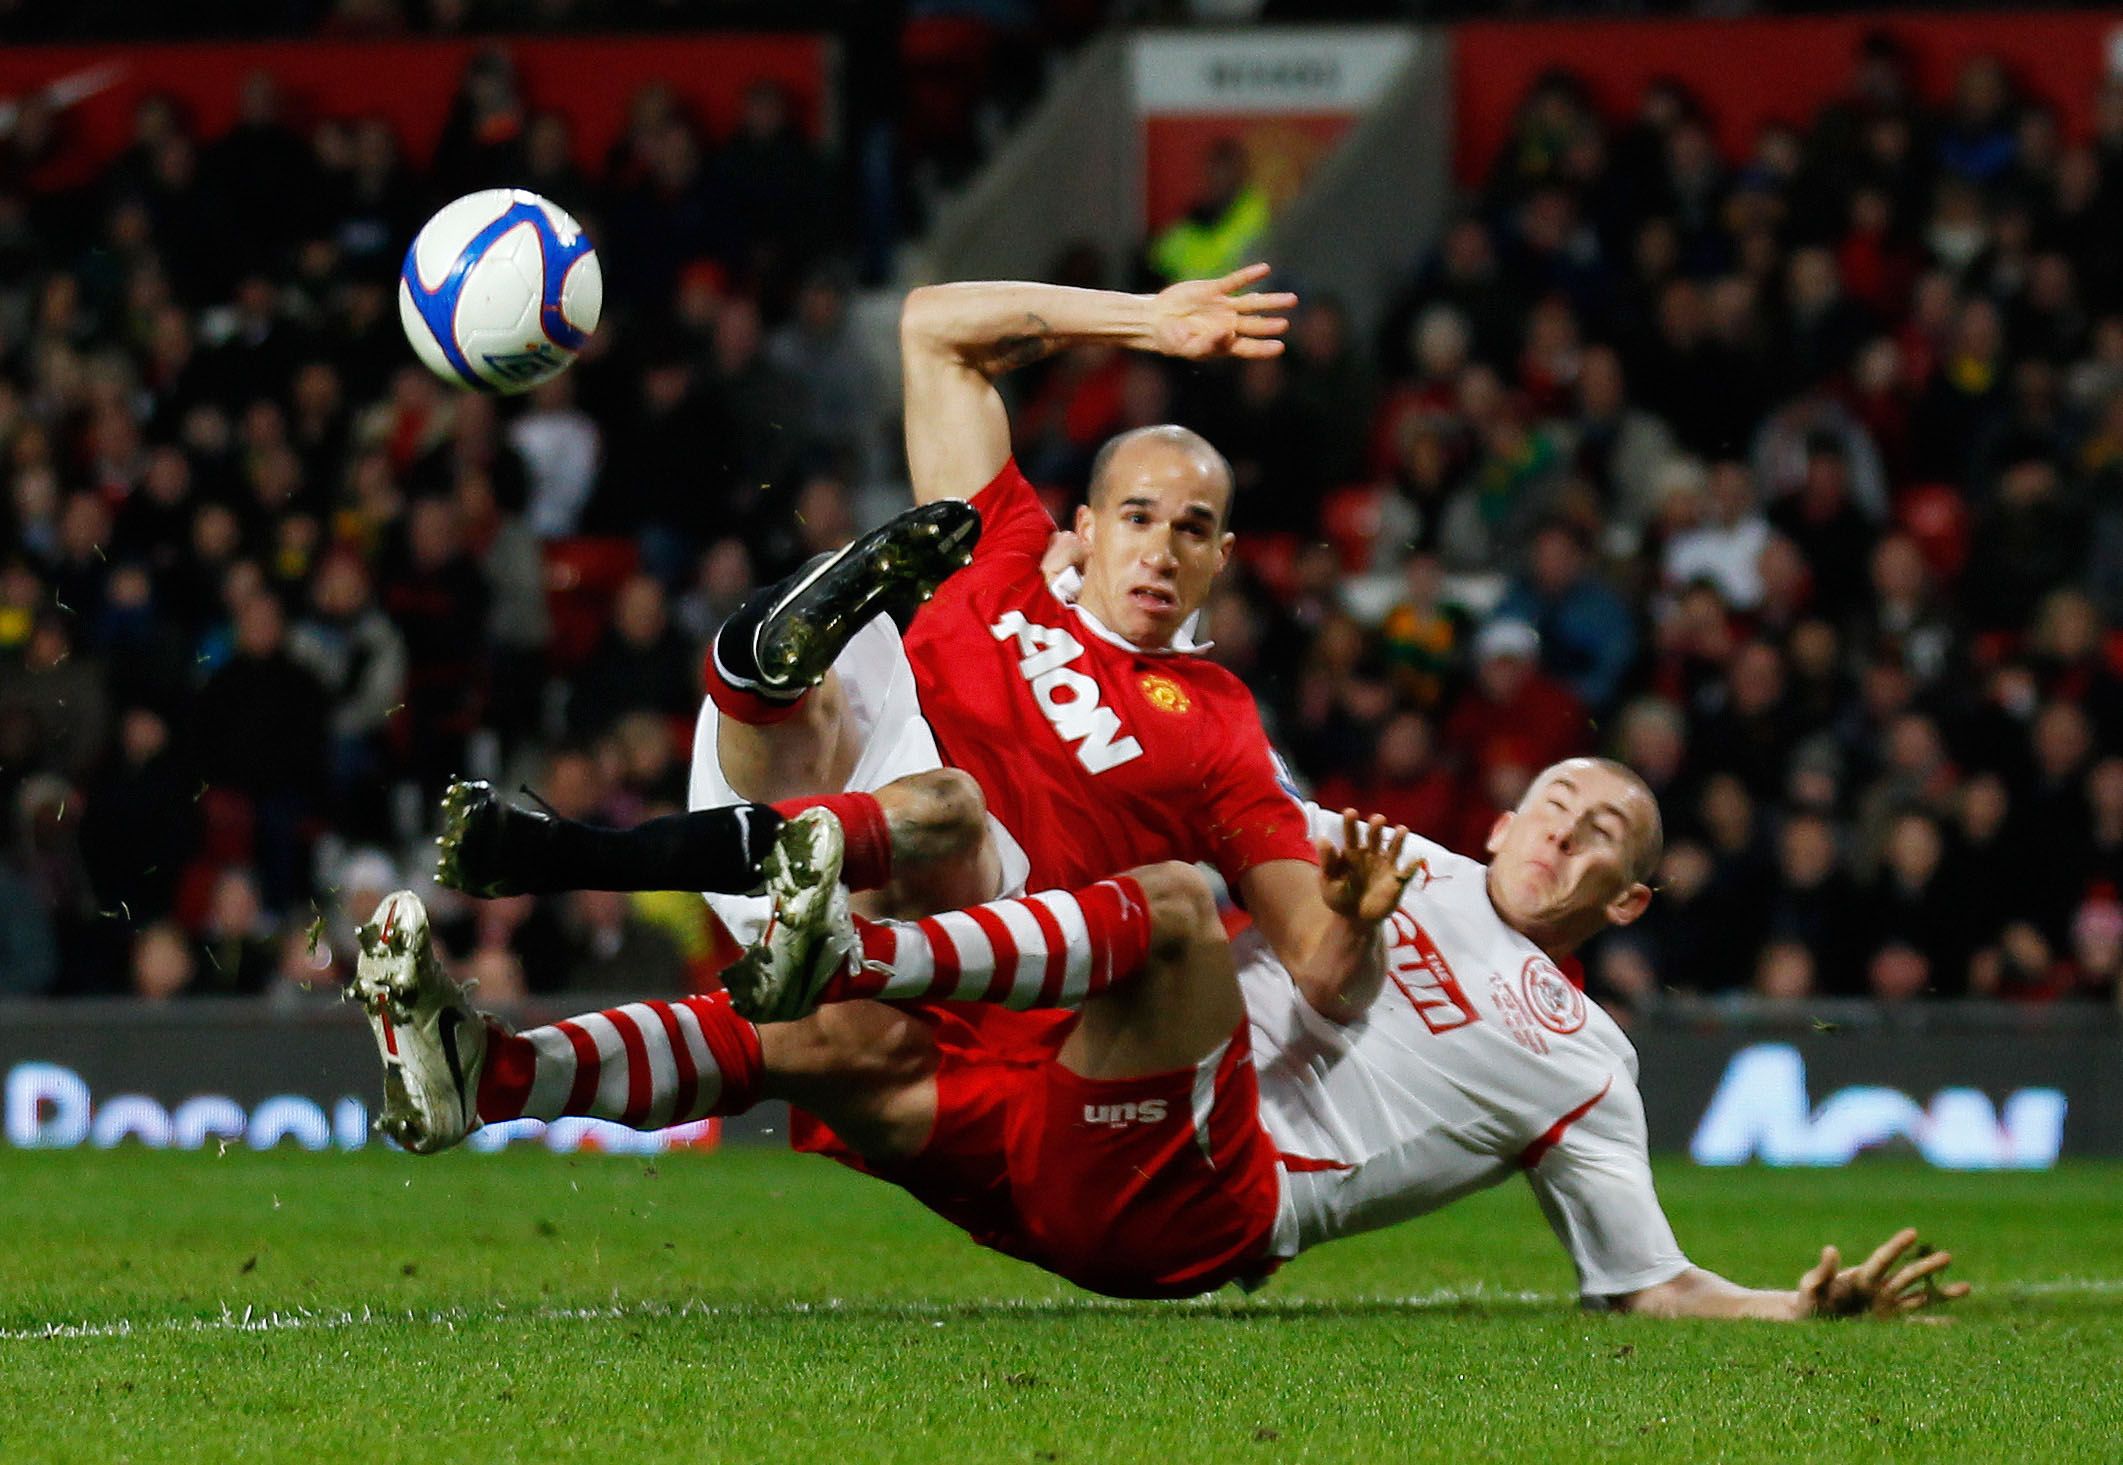 Football - Manchester United v Crawley Town FA Cup Fifth Round  - Old Trafford  -  10/11 - 19/2/11 
Manchester United's Gabriel Obertan and Kyle McFadzean (R) of Crawley Town in action 
Mandatory Credit: Action Images / Jason Cairnduff 
Livepic